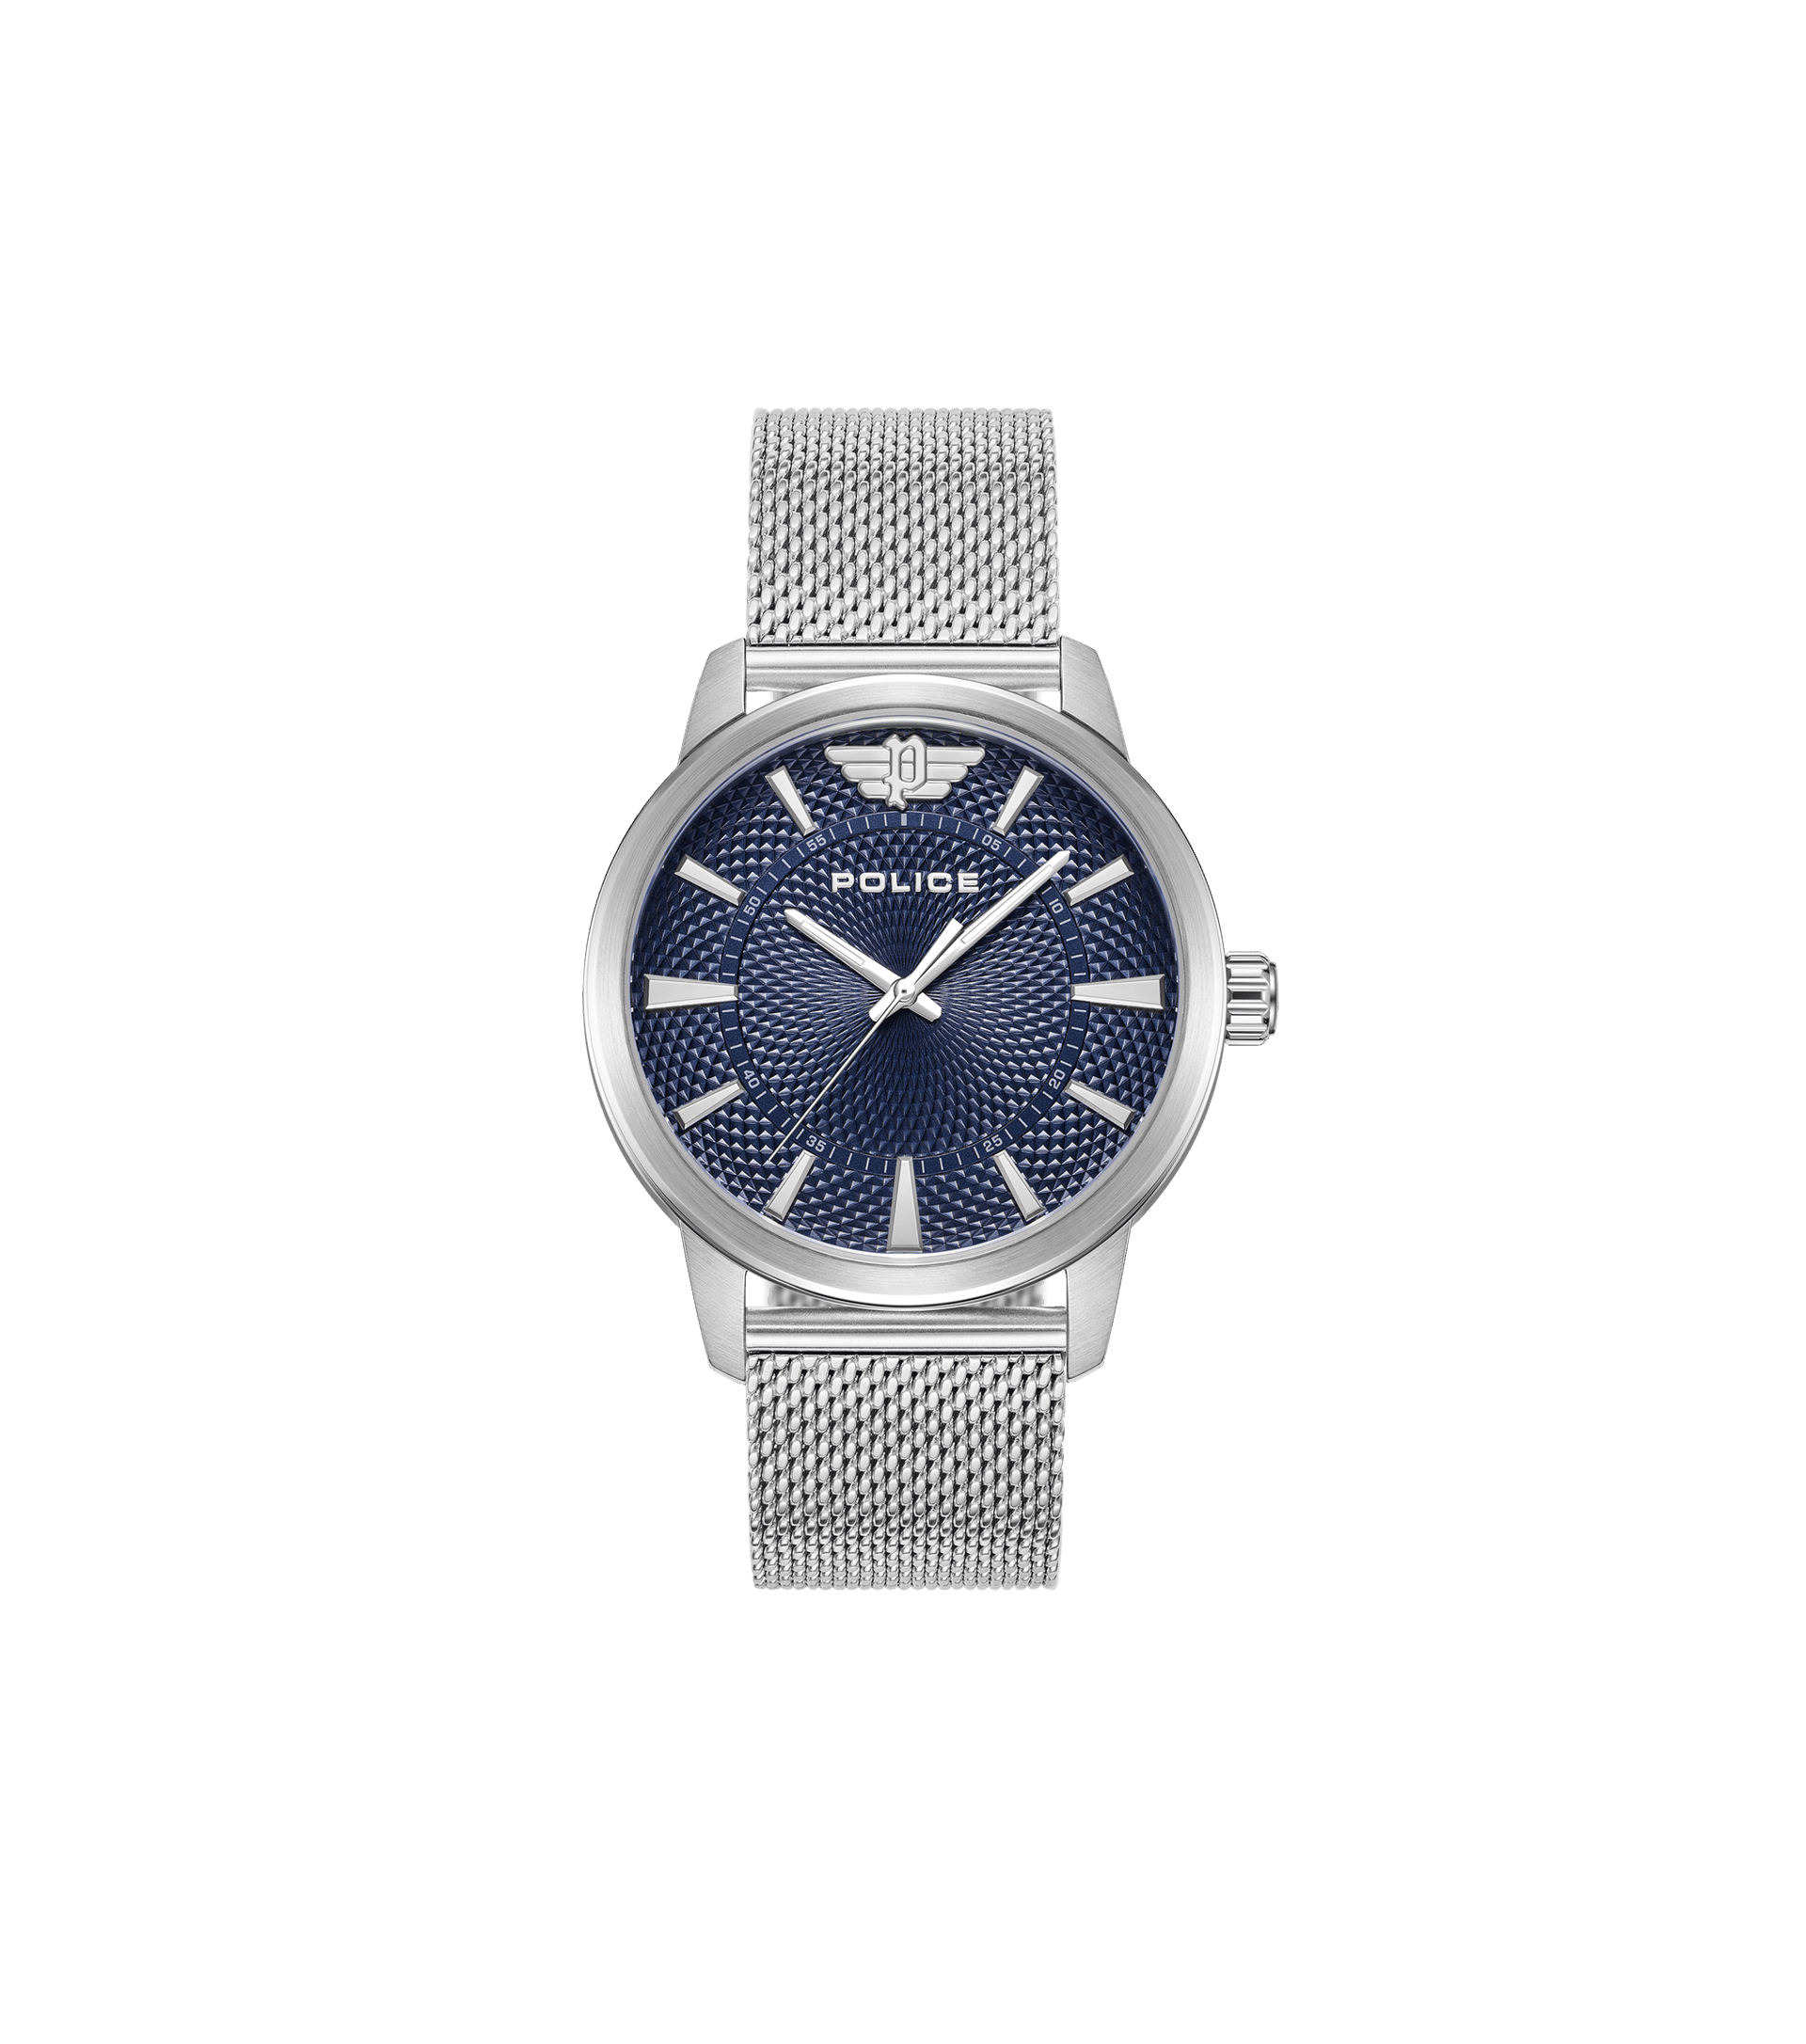 Police - Blue, Silver watches For Omaio Men Police Watch